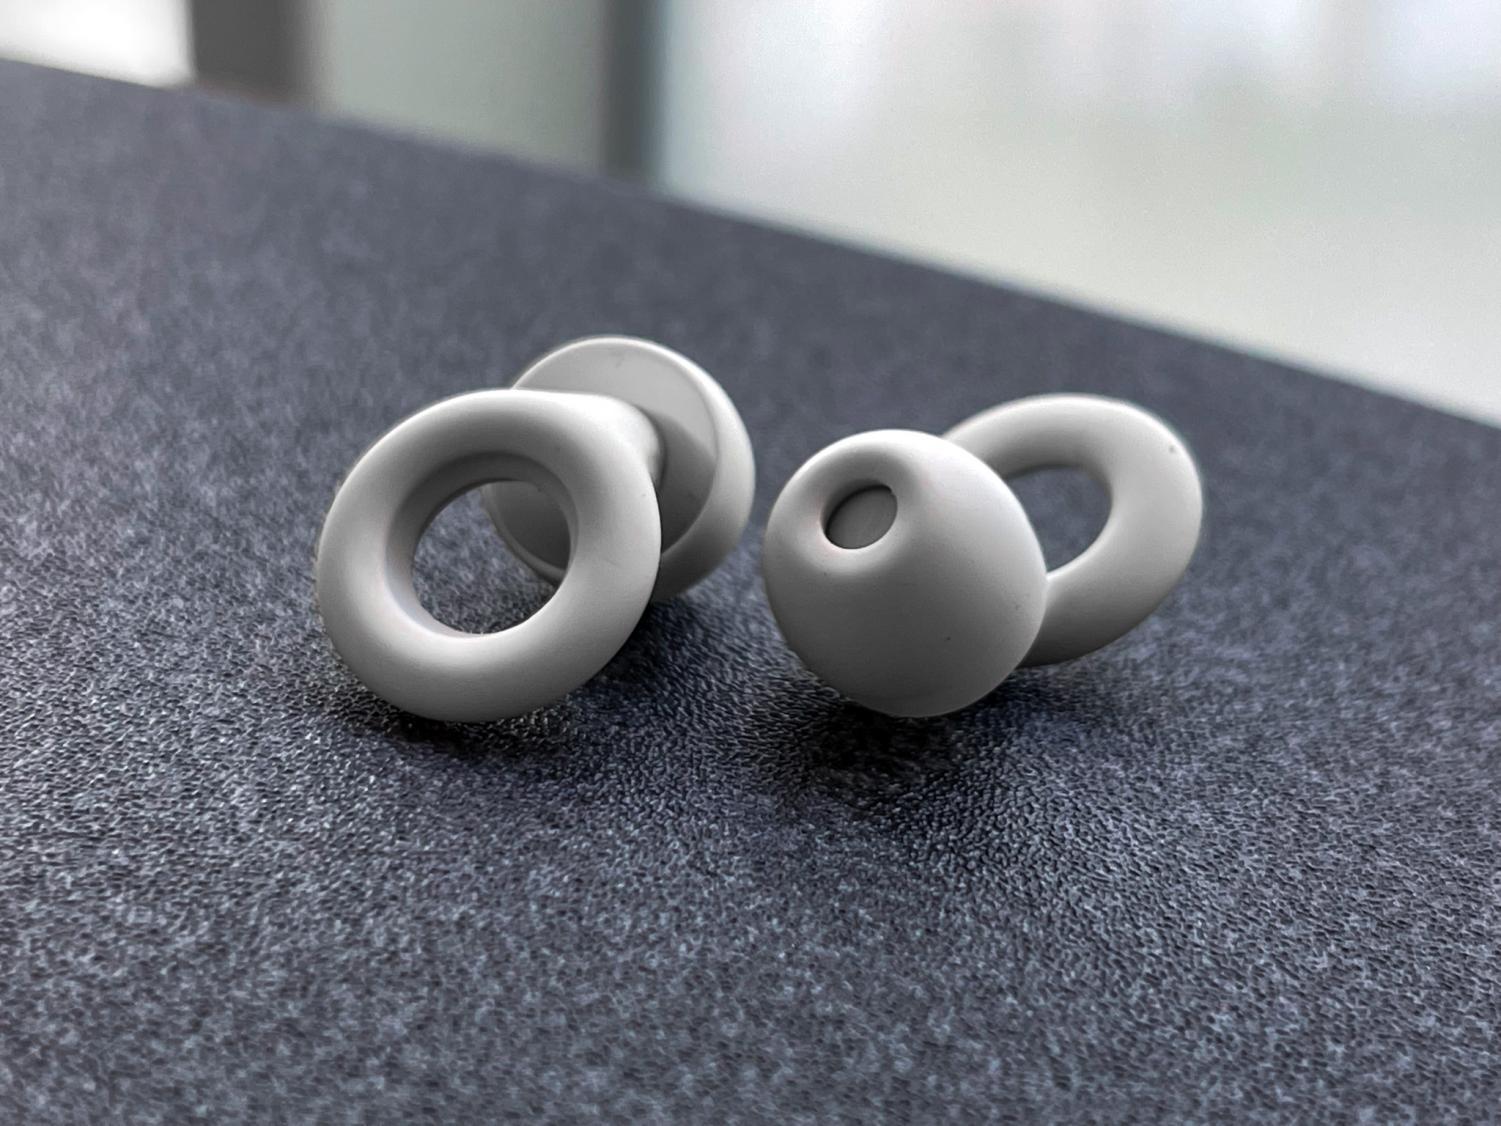 Loop Earplugs Review, Info, Prices and More